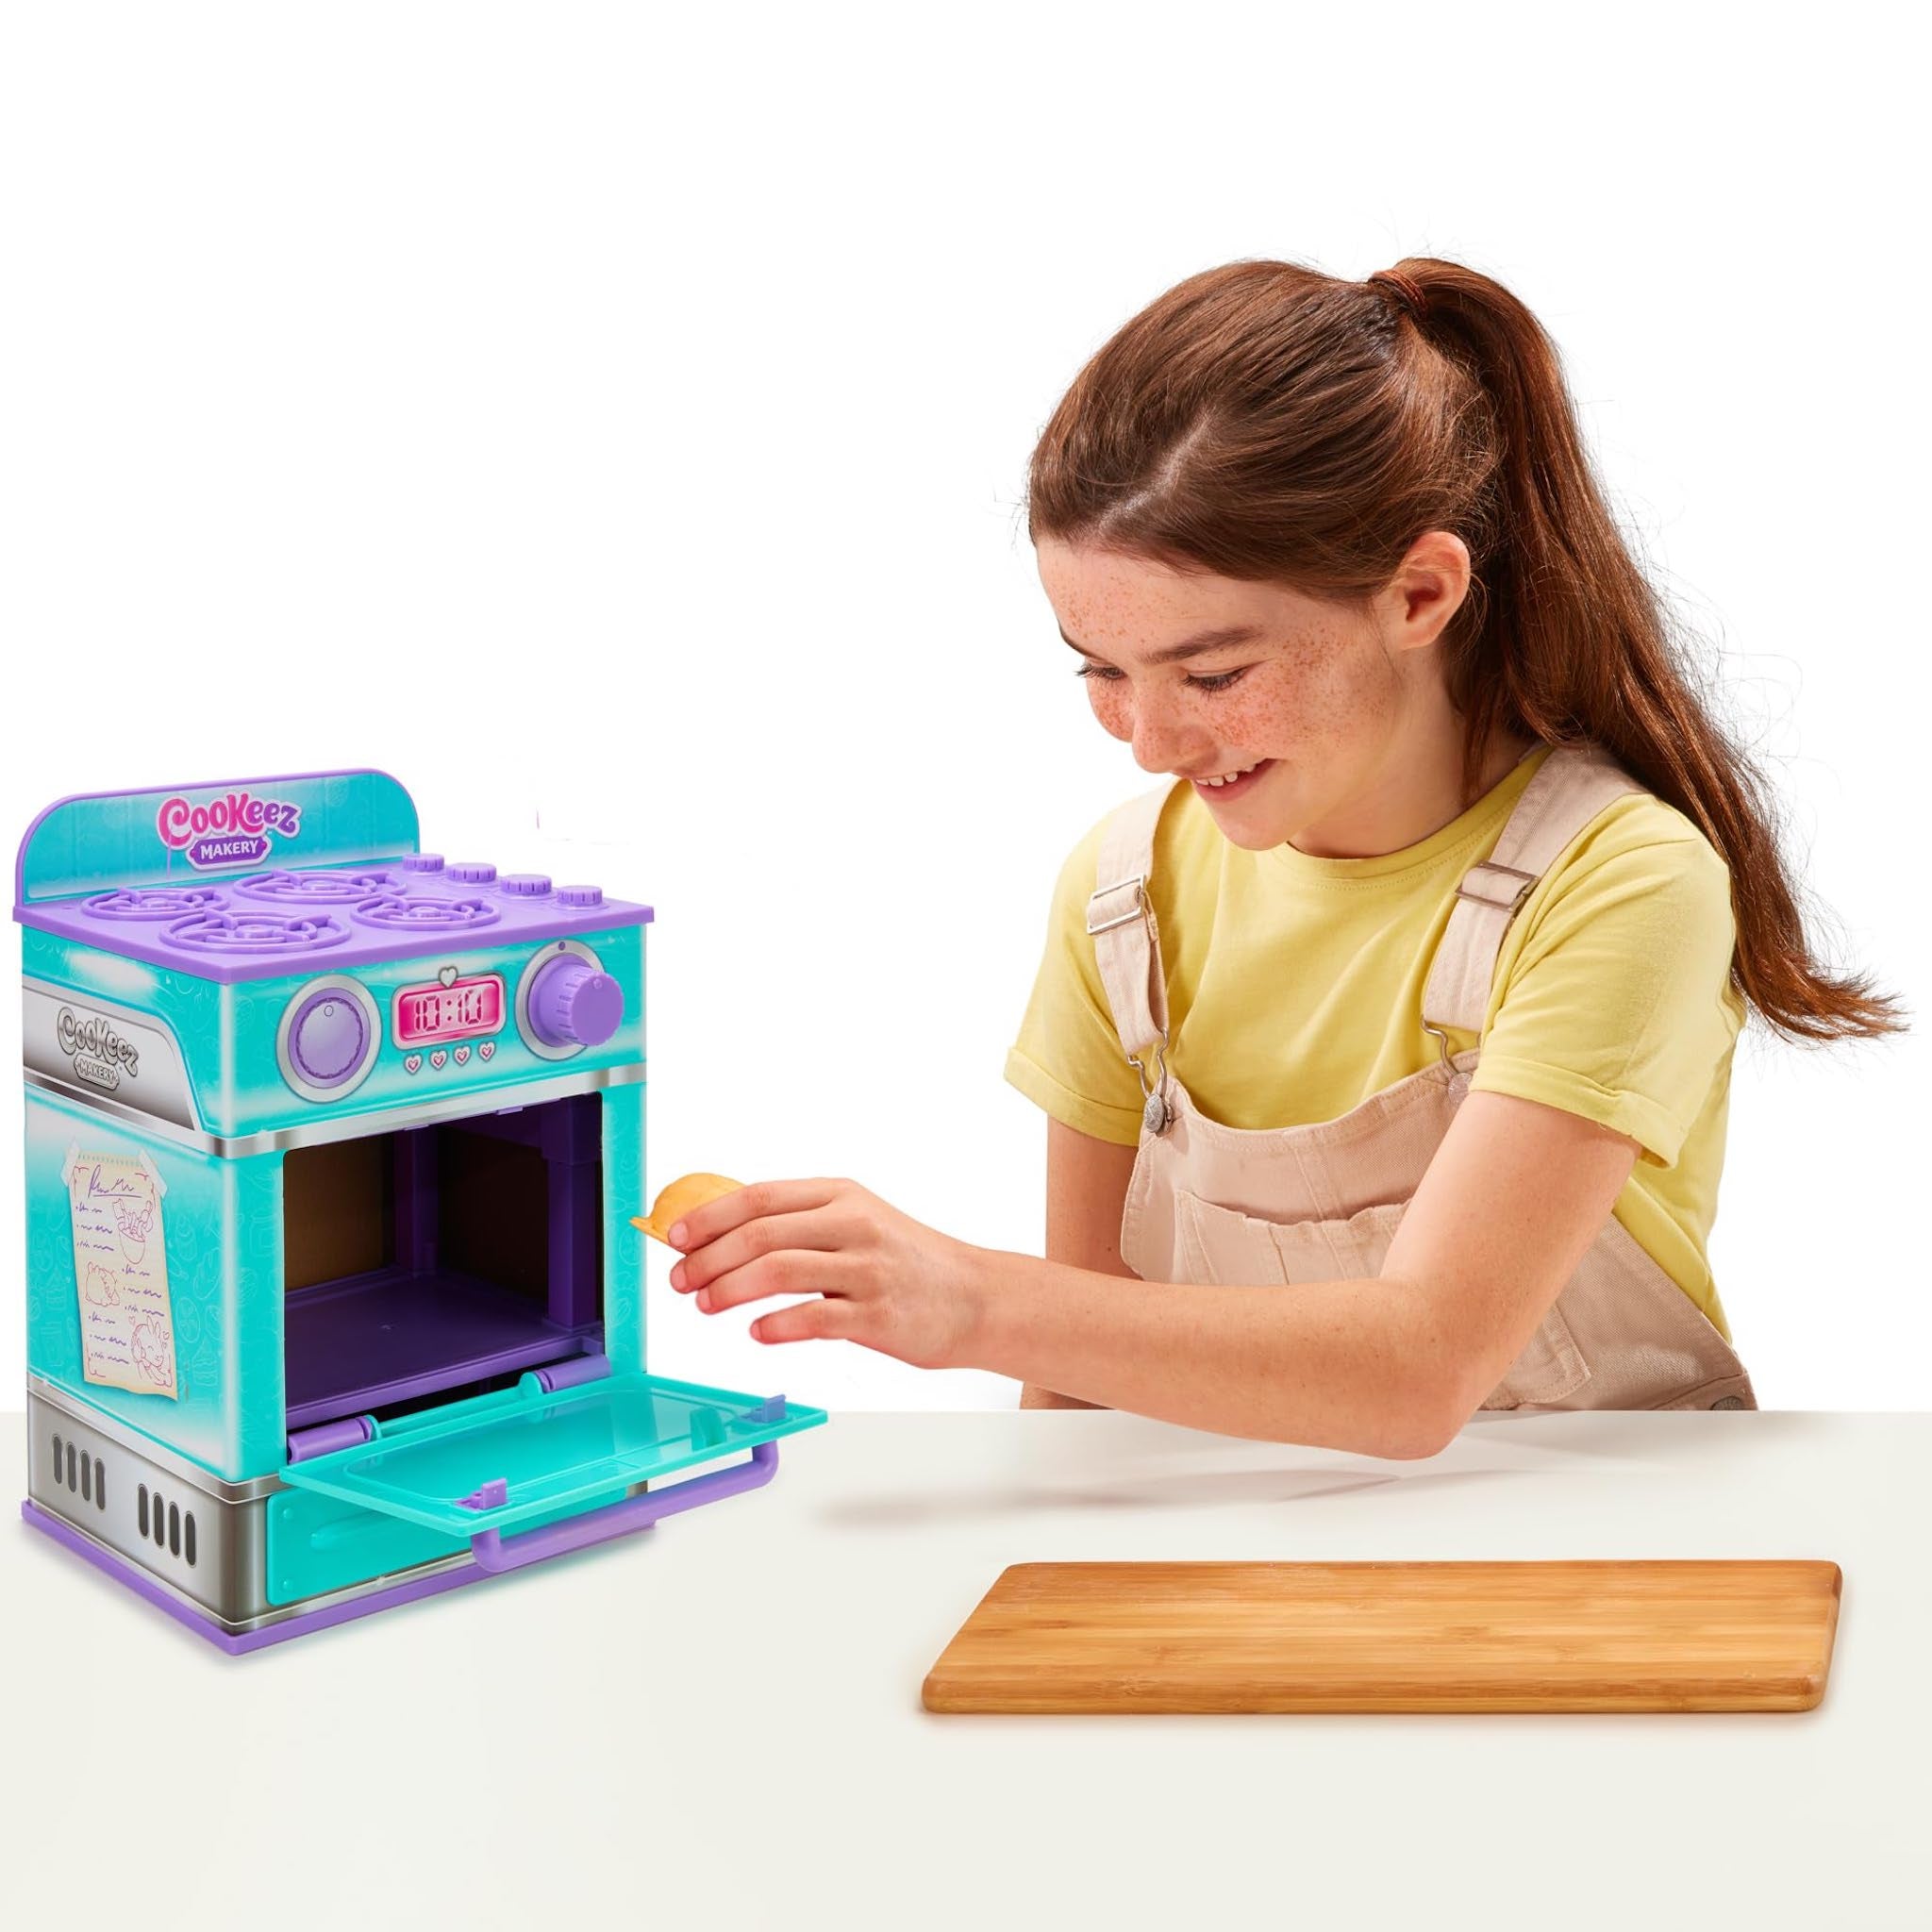 ad Who said baking isn't easy? This Cookez Makery oven playset from @, Cookeez Makery